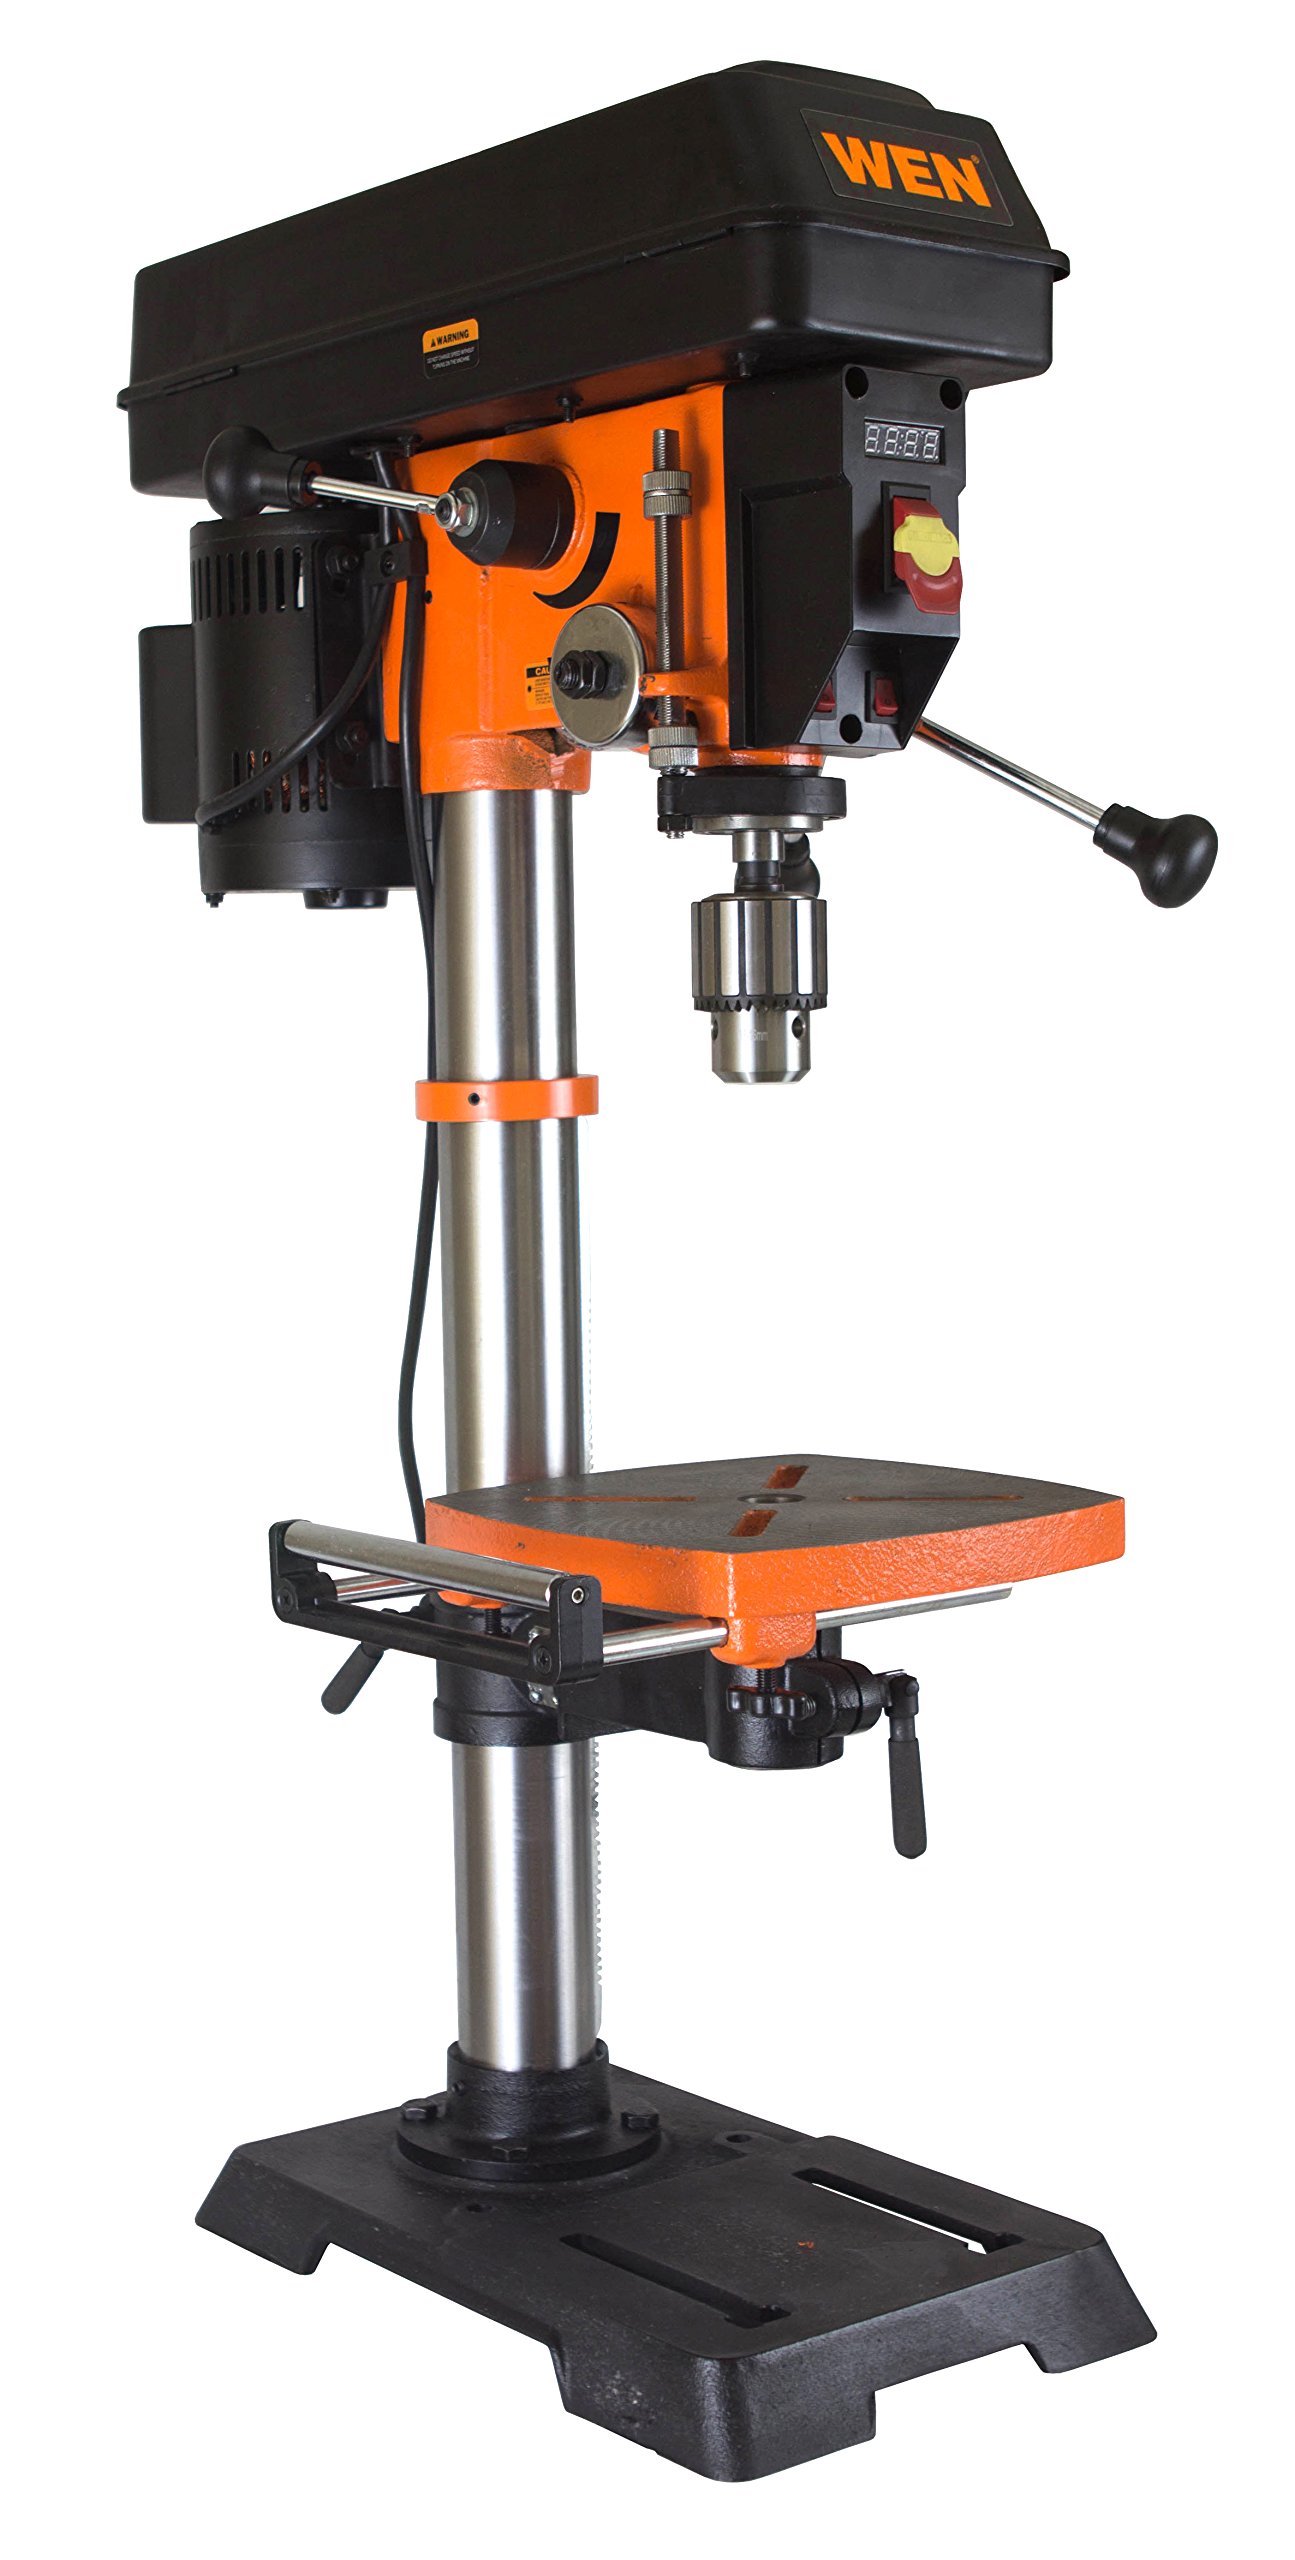 WEN 4214T 5-Amp 12-Inch Variable Speed Cast Iron Drill Press $216